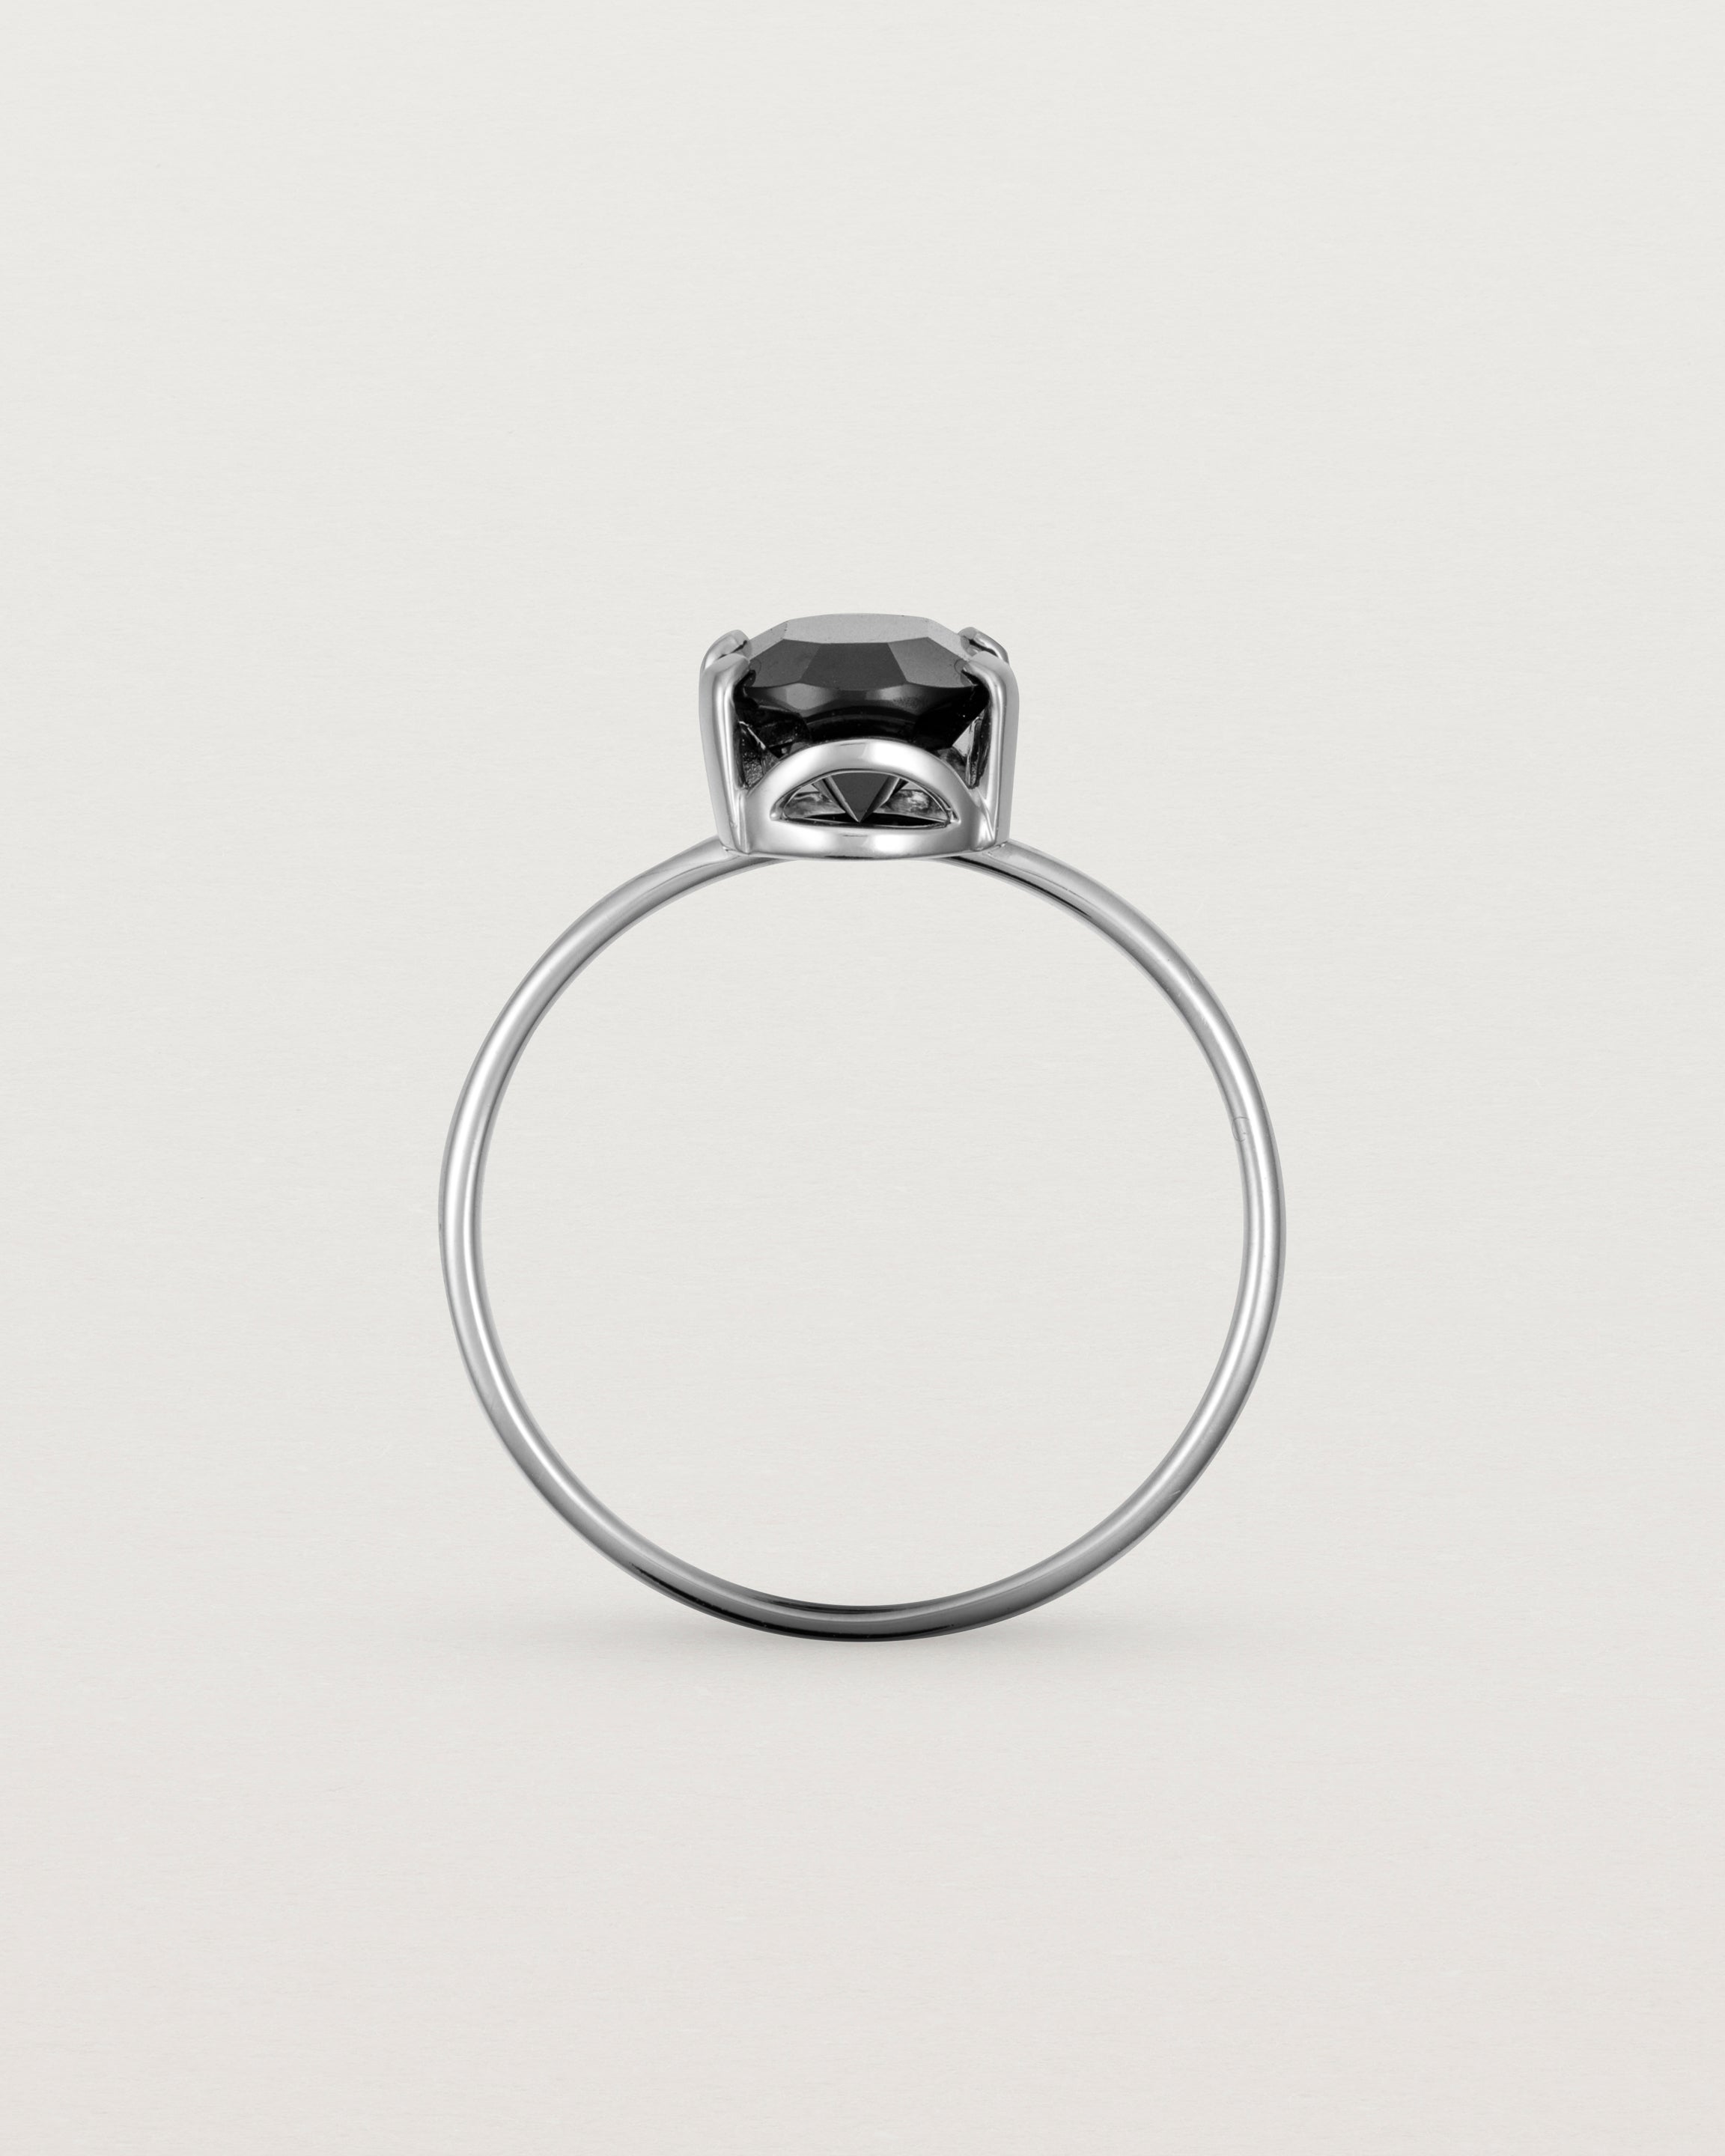 Standing view of the Fei Ring | Black Spinel in Sterling Silver.